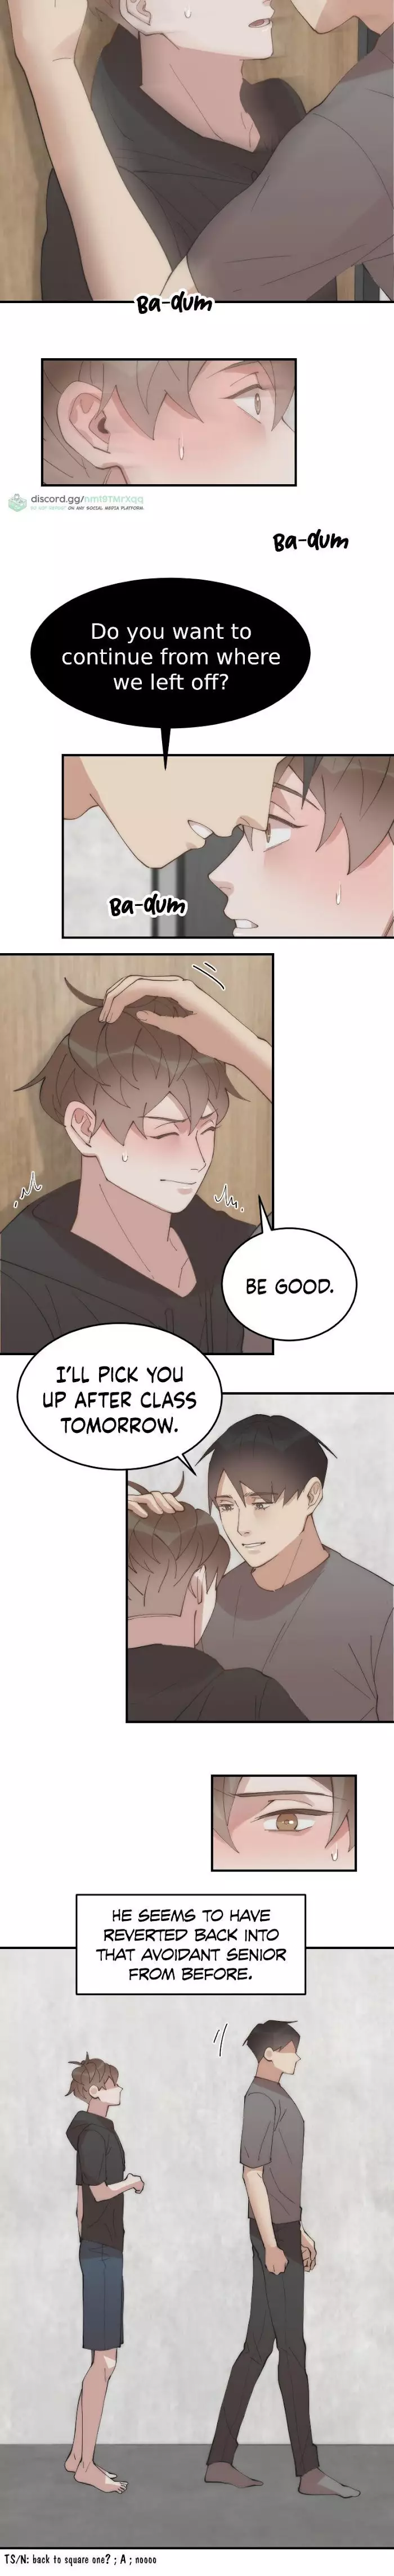 My Roommate, Handsome Senior - 26 page 11-039b0665